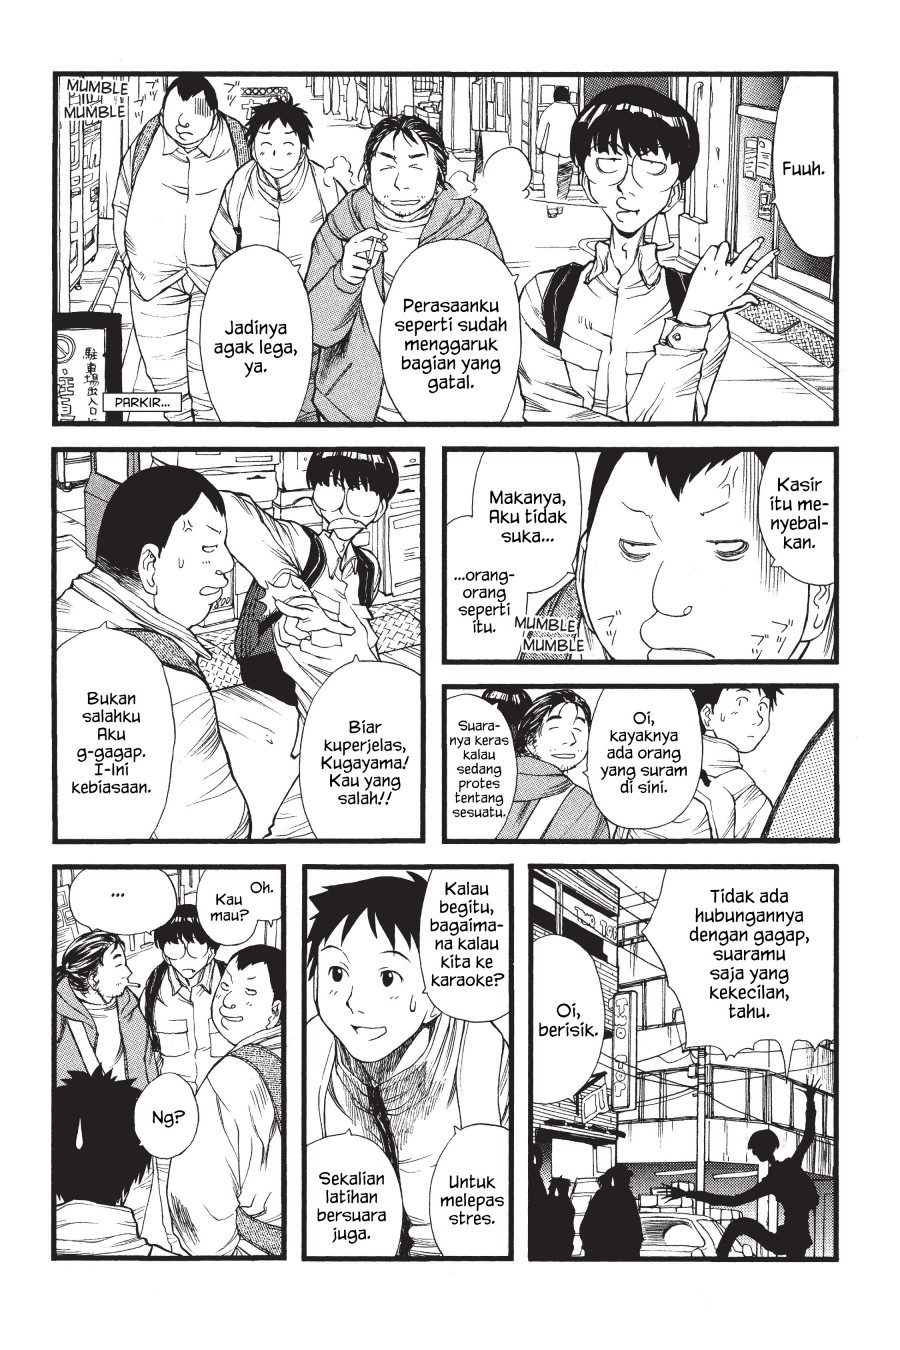 Genshiken – The Society for the Study of Modern Visual Culture Chapter 03 Image 16